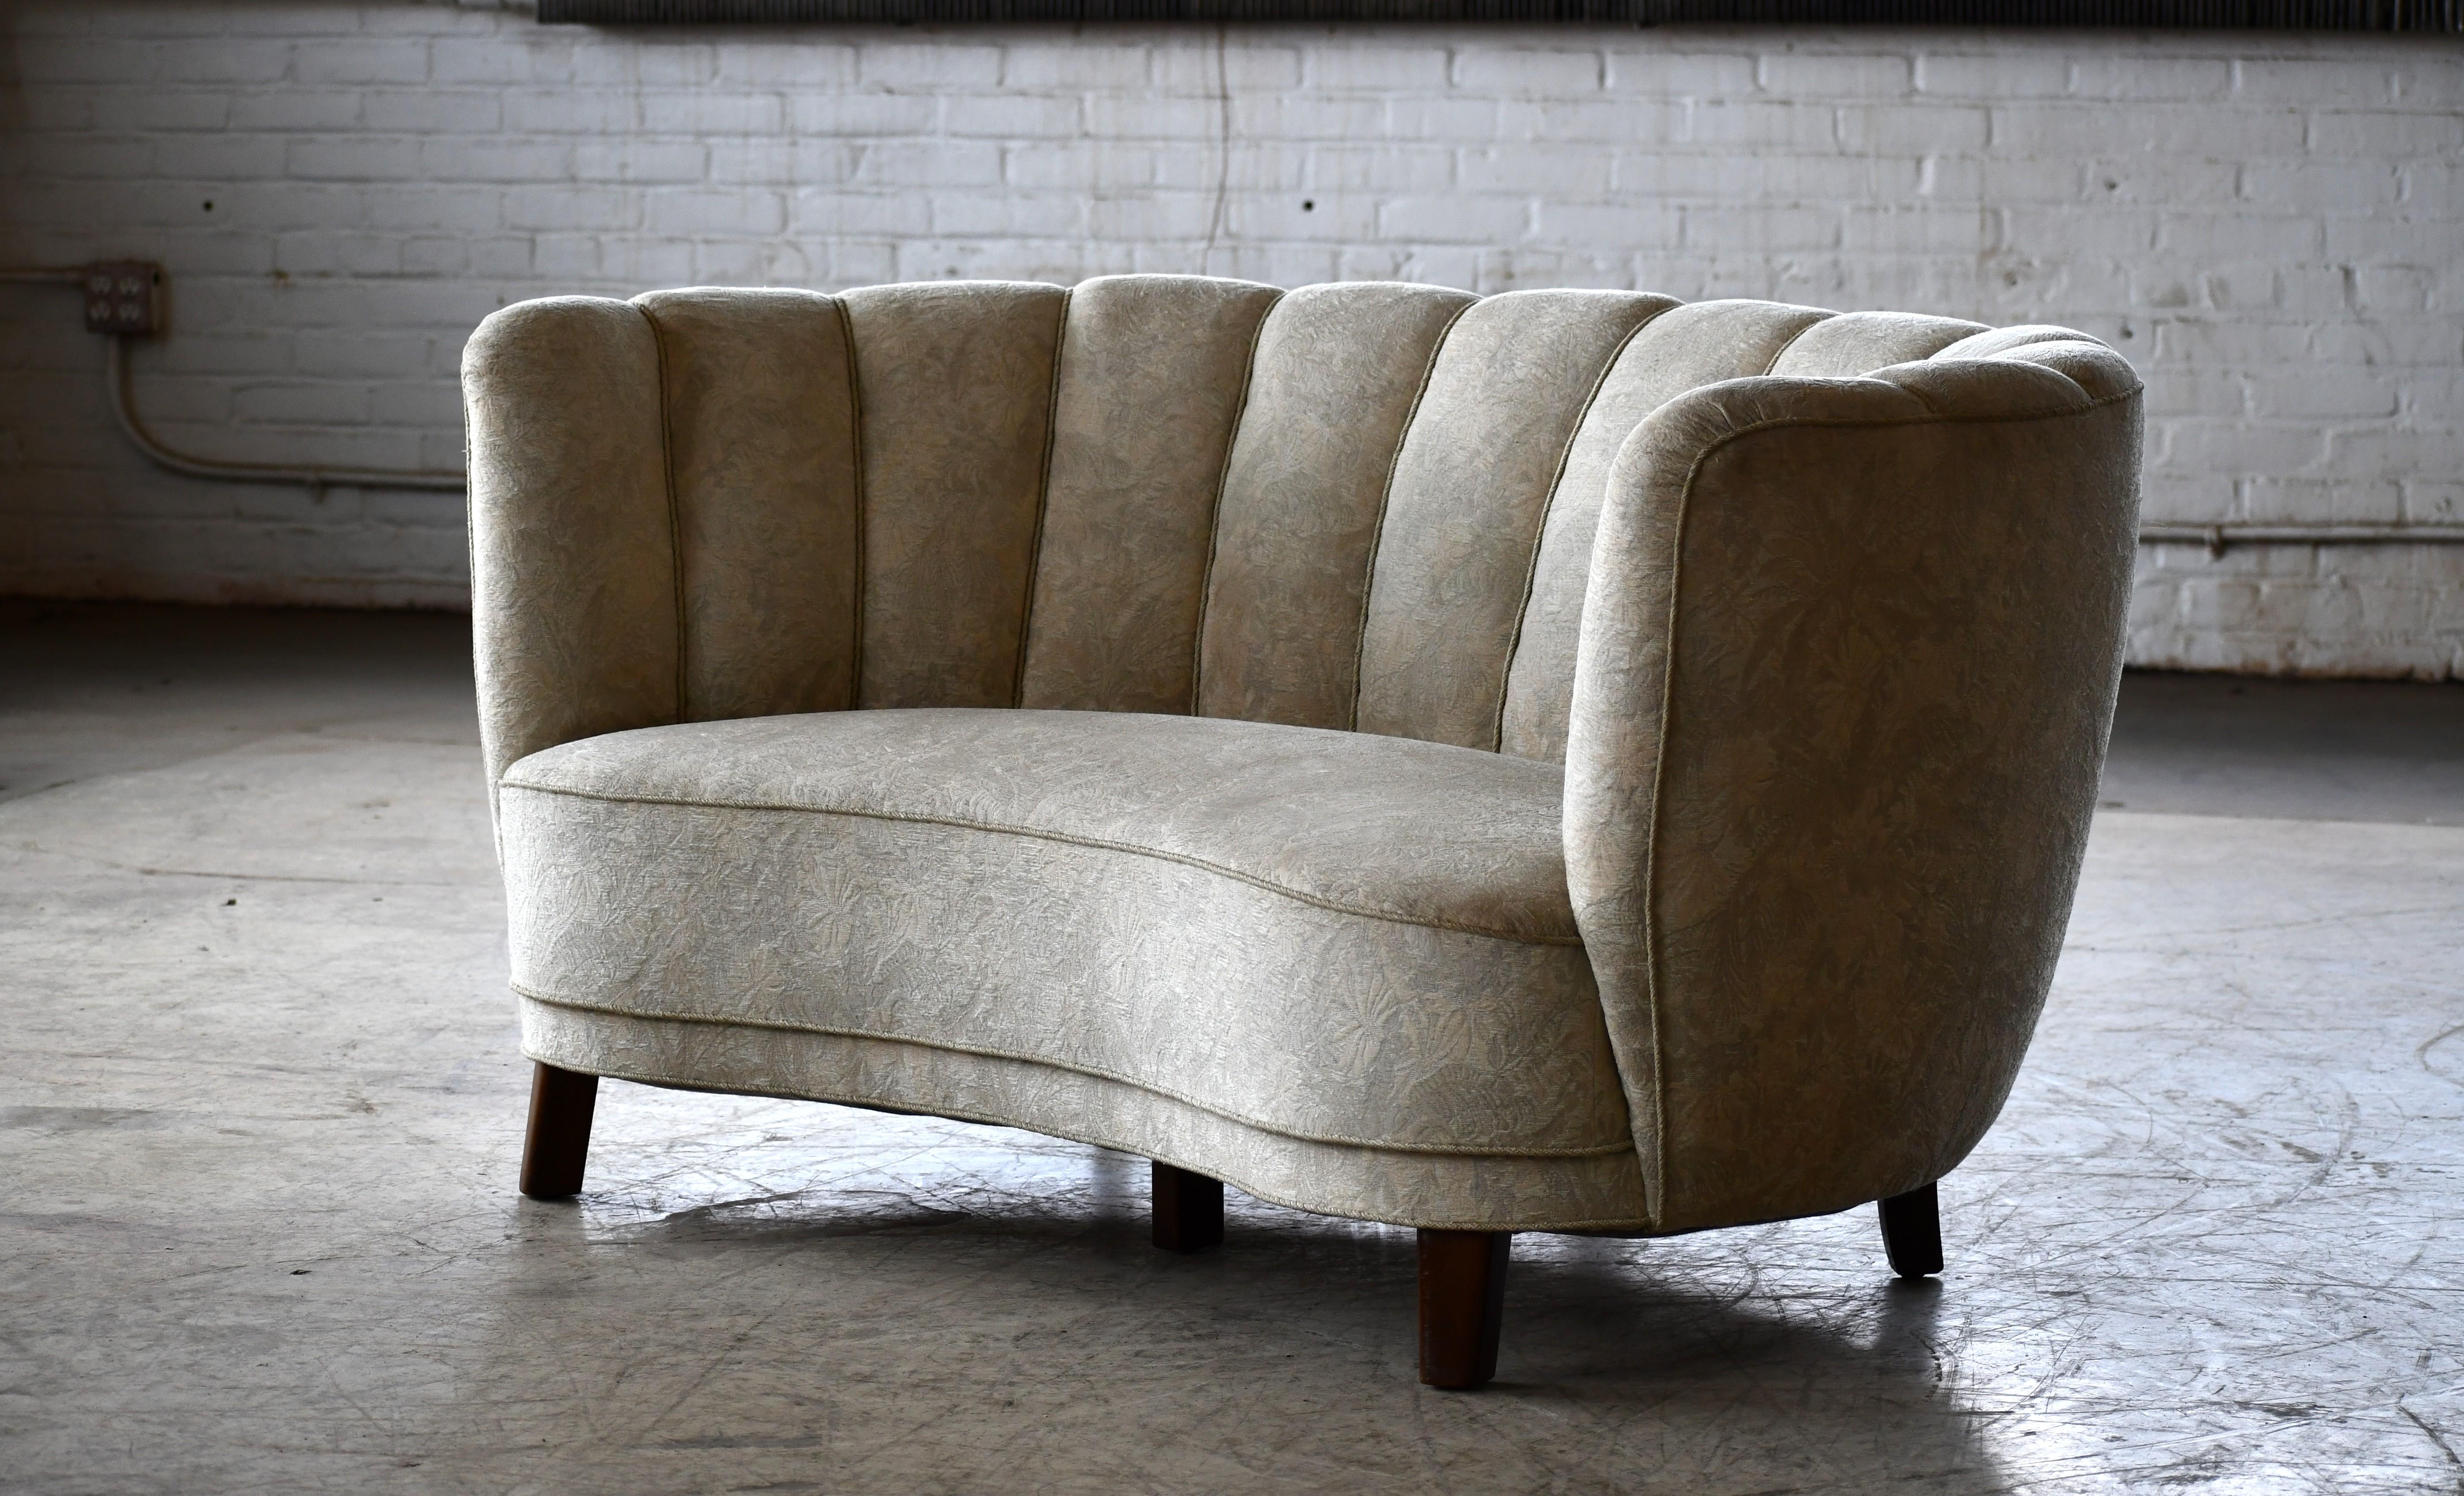 Mid-20th Century Danish 1940s Channel Back Banana Form Curved Sofa or Loveseat in White Wool  For Sale